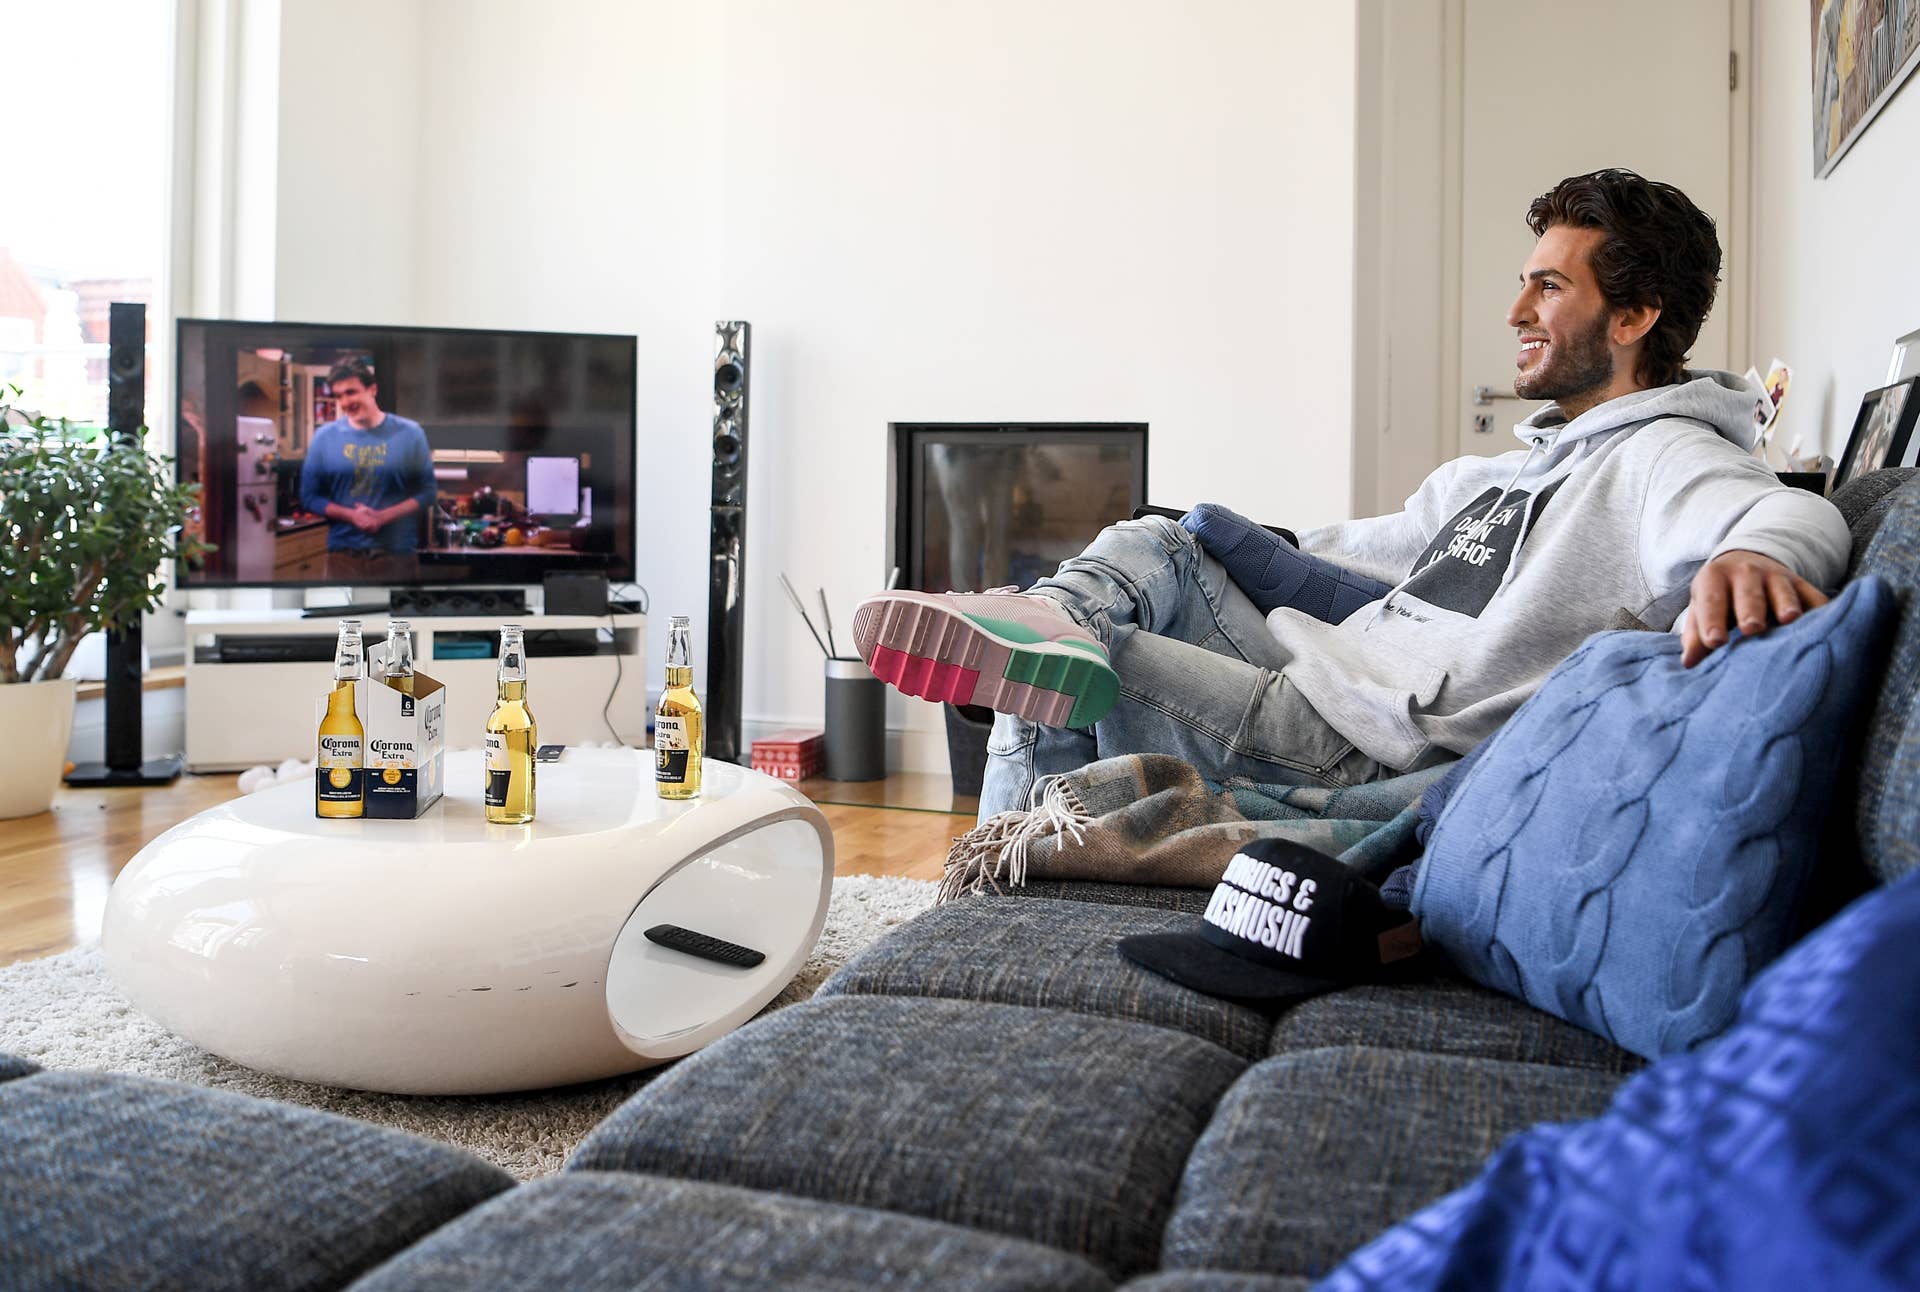 The wax figure of the actor Elyas M'Barek is shown in a scene on a couch while watching television